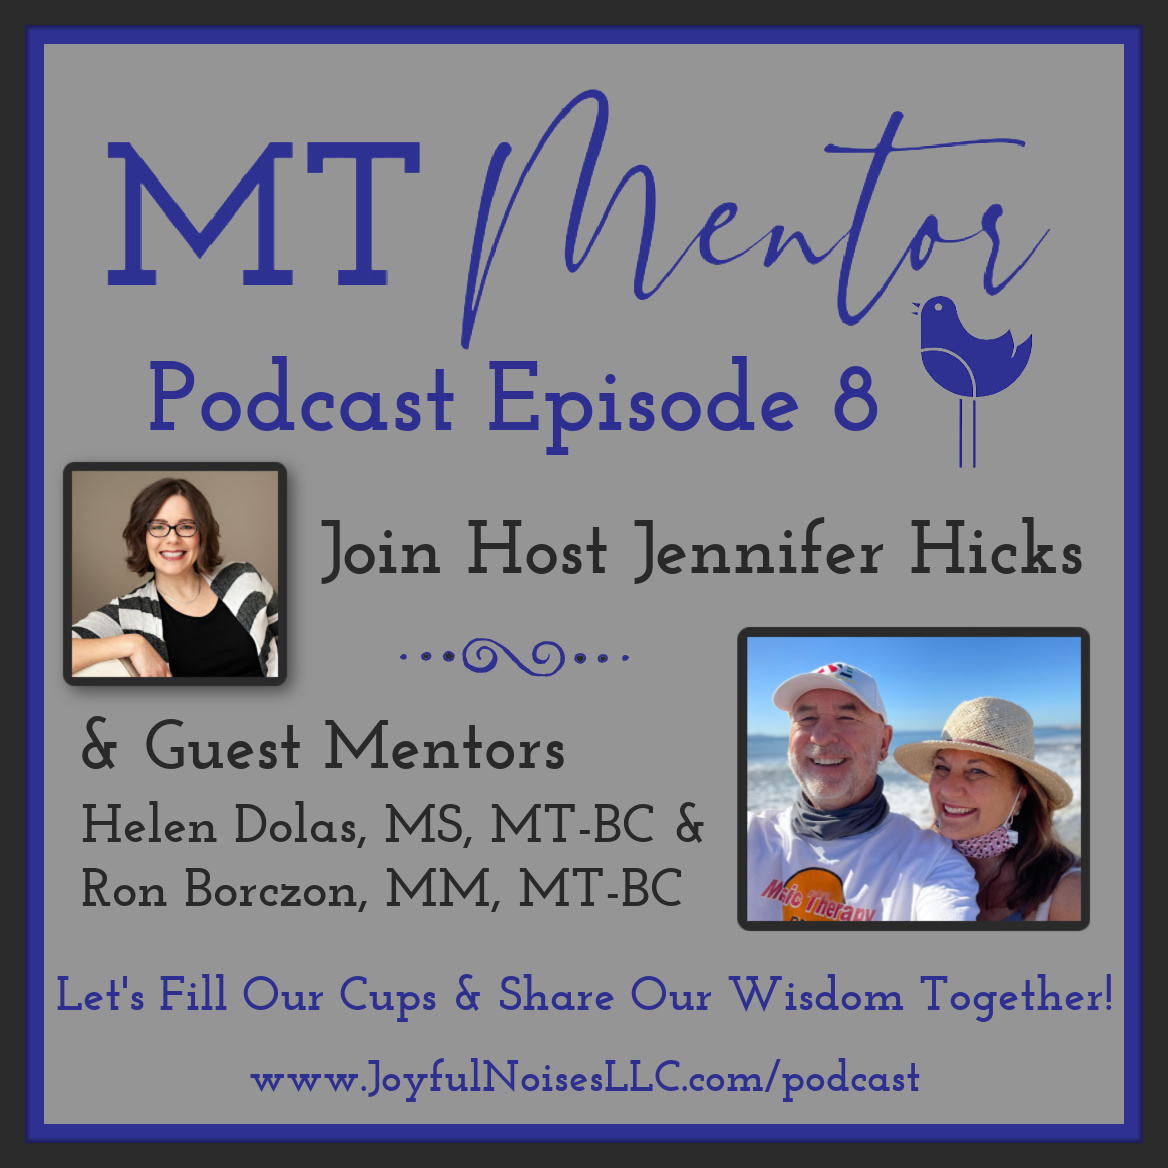 Headshots of host Jennifer Hicks and guest mentors Helen Dolas and Ron Borczon with "MT Mentor Podcast Episode 8: Let's Fill Our Cups & Share Our Wisdom Together"